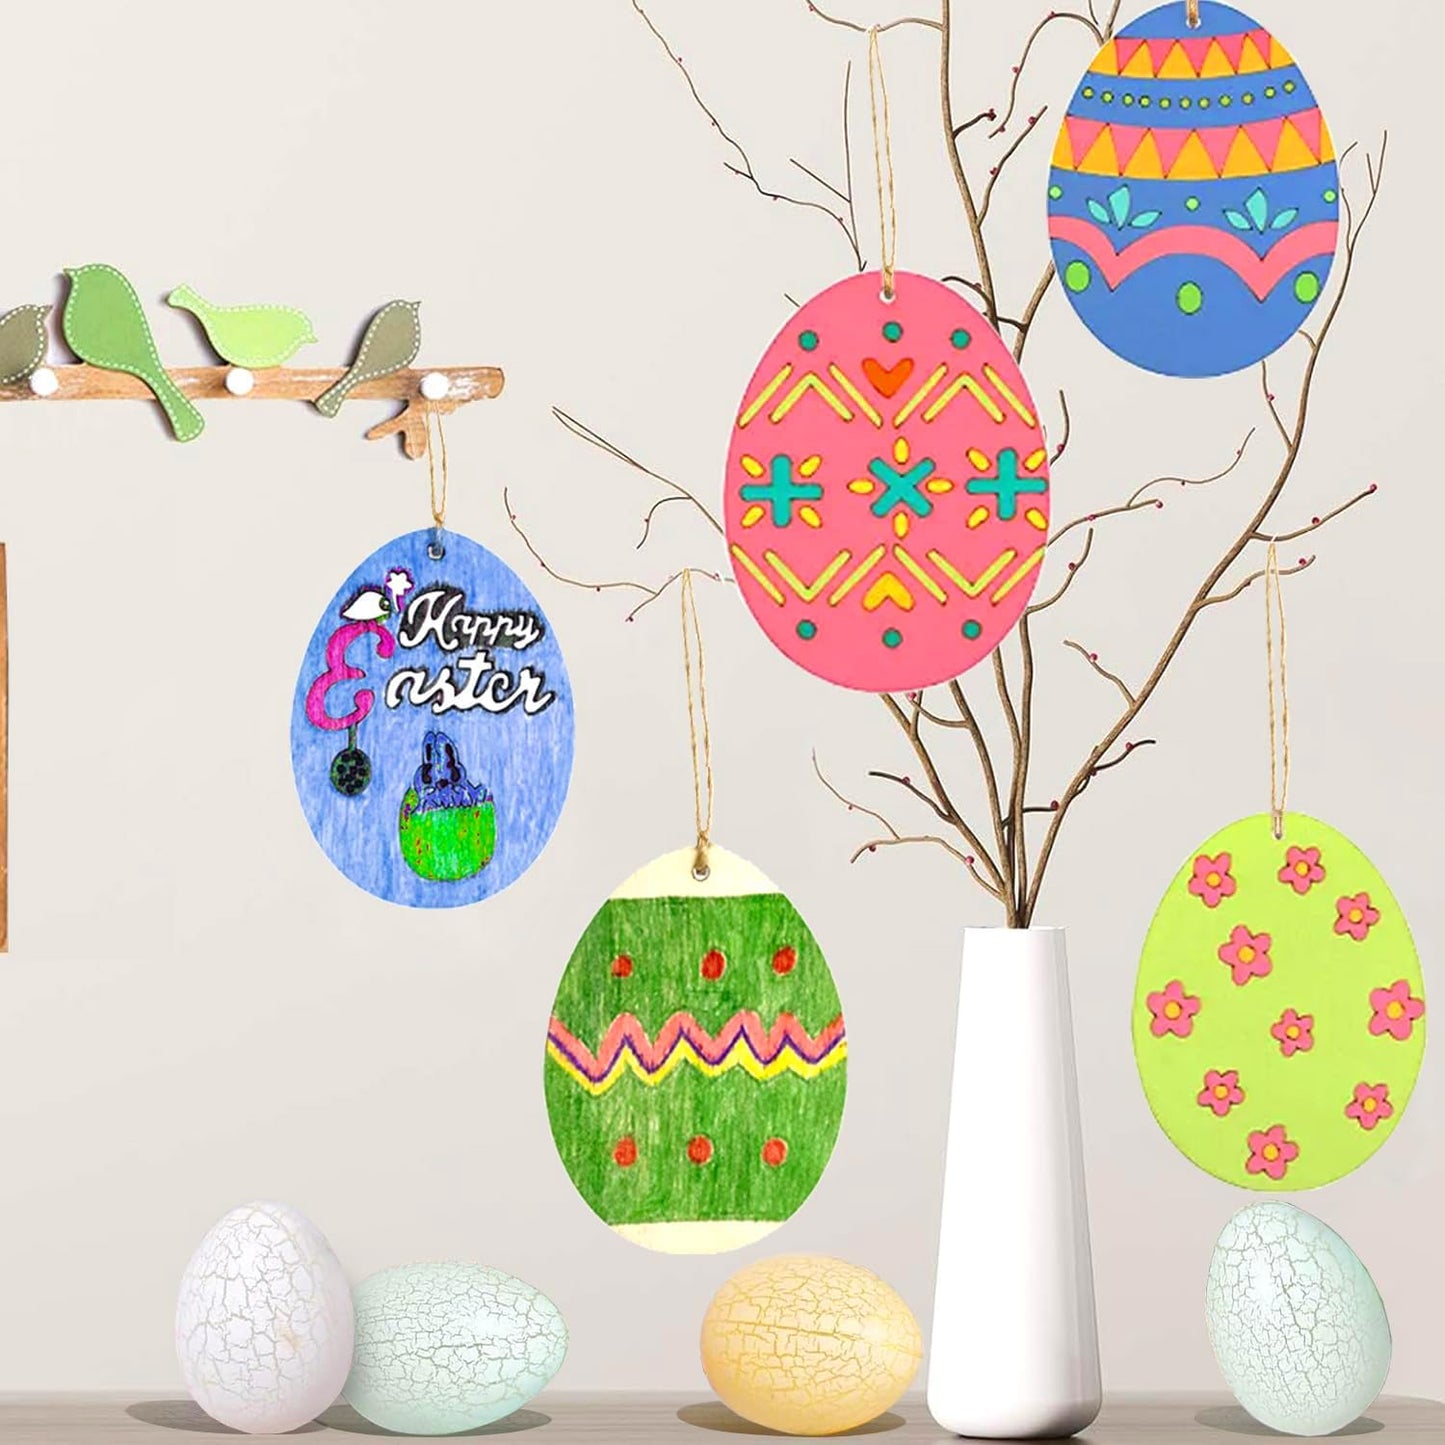 30 PCS Wooden Easter Eggs for Crafts, Blank Wood Cutout Easter Egg Ornaments DIY Crafts, Unfinished Egg Wood Slices for Painting Project Easter Craft